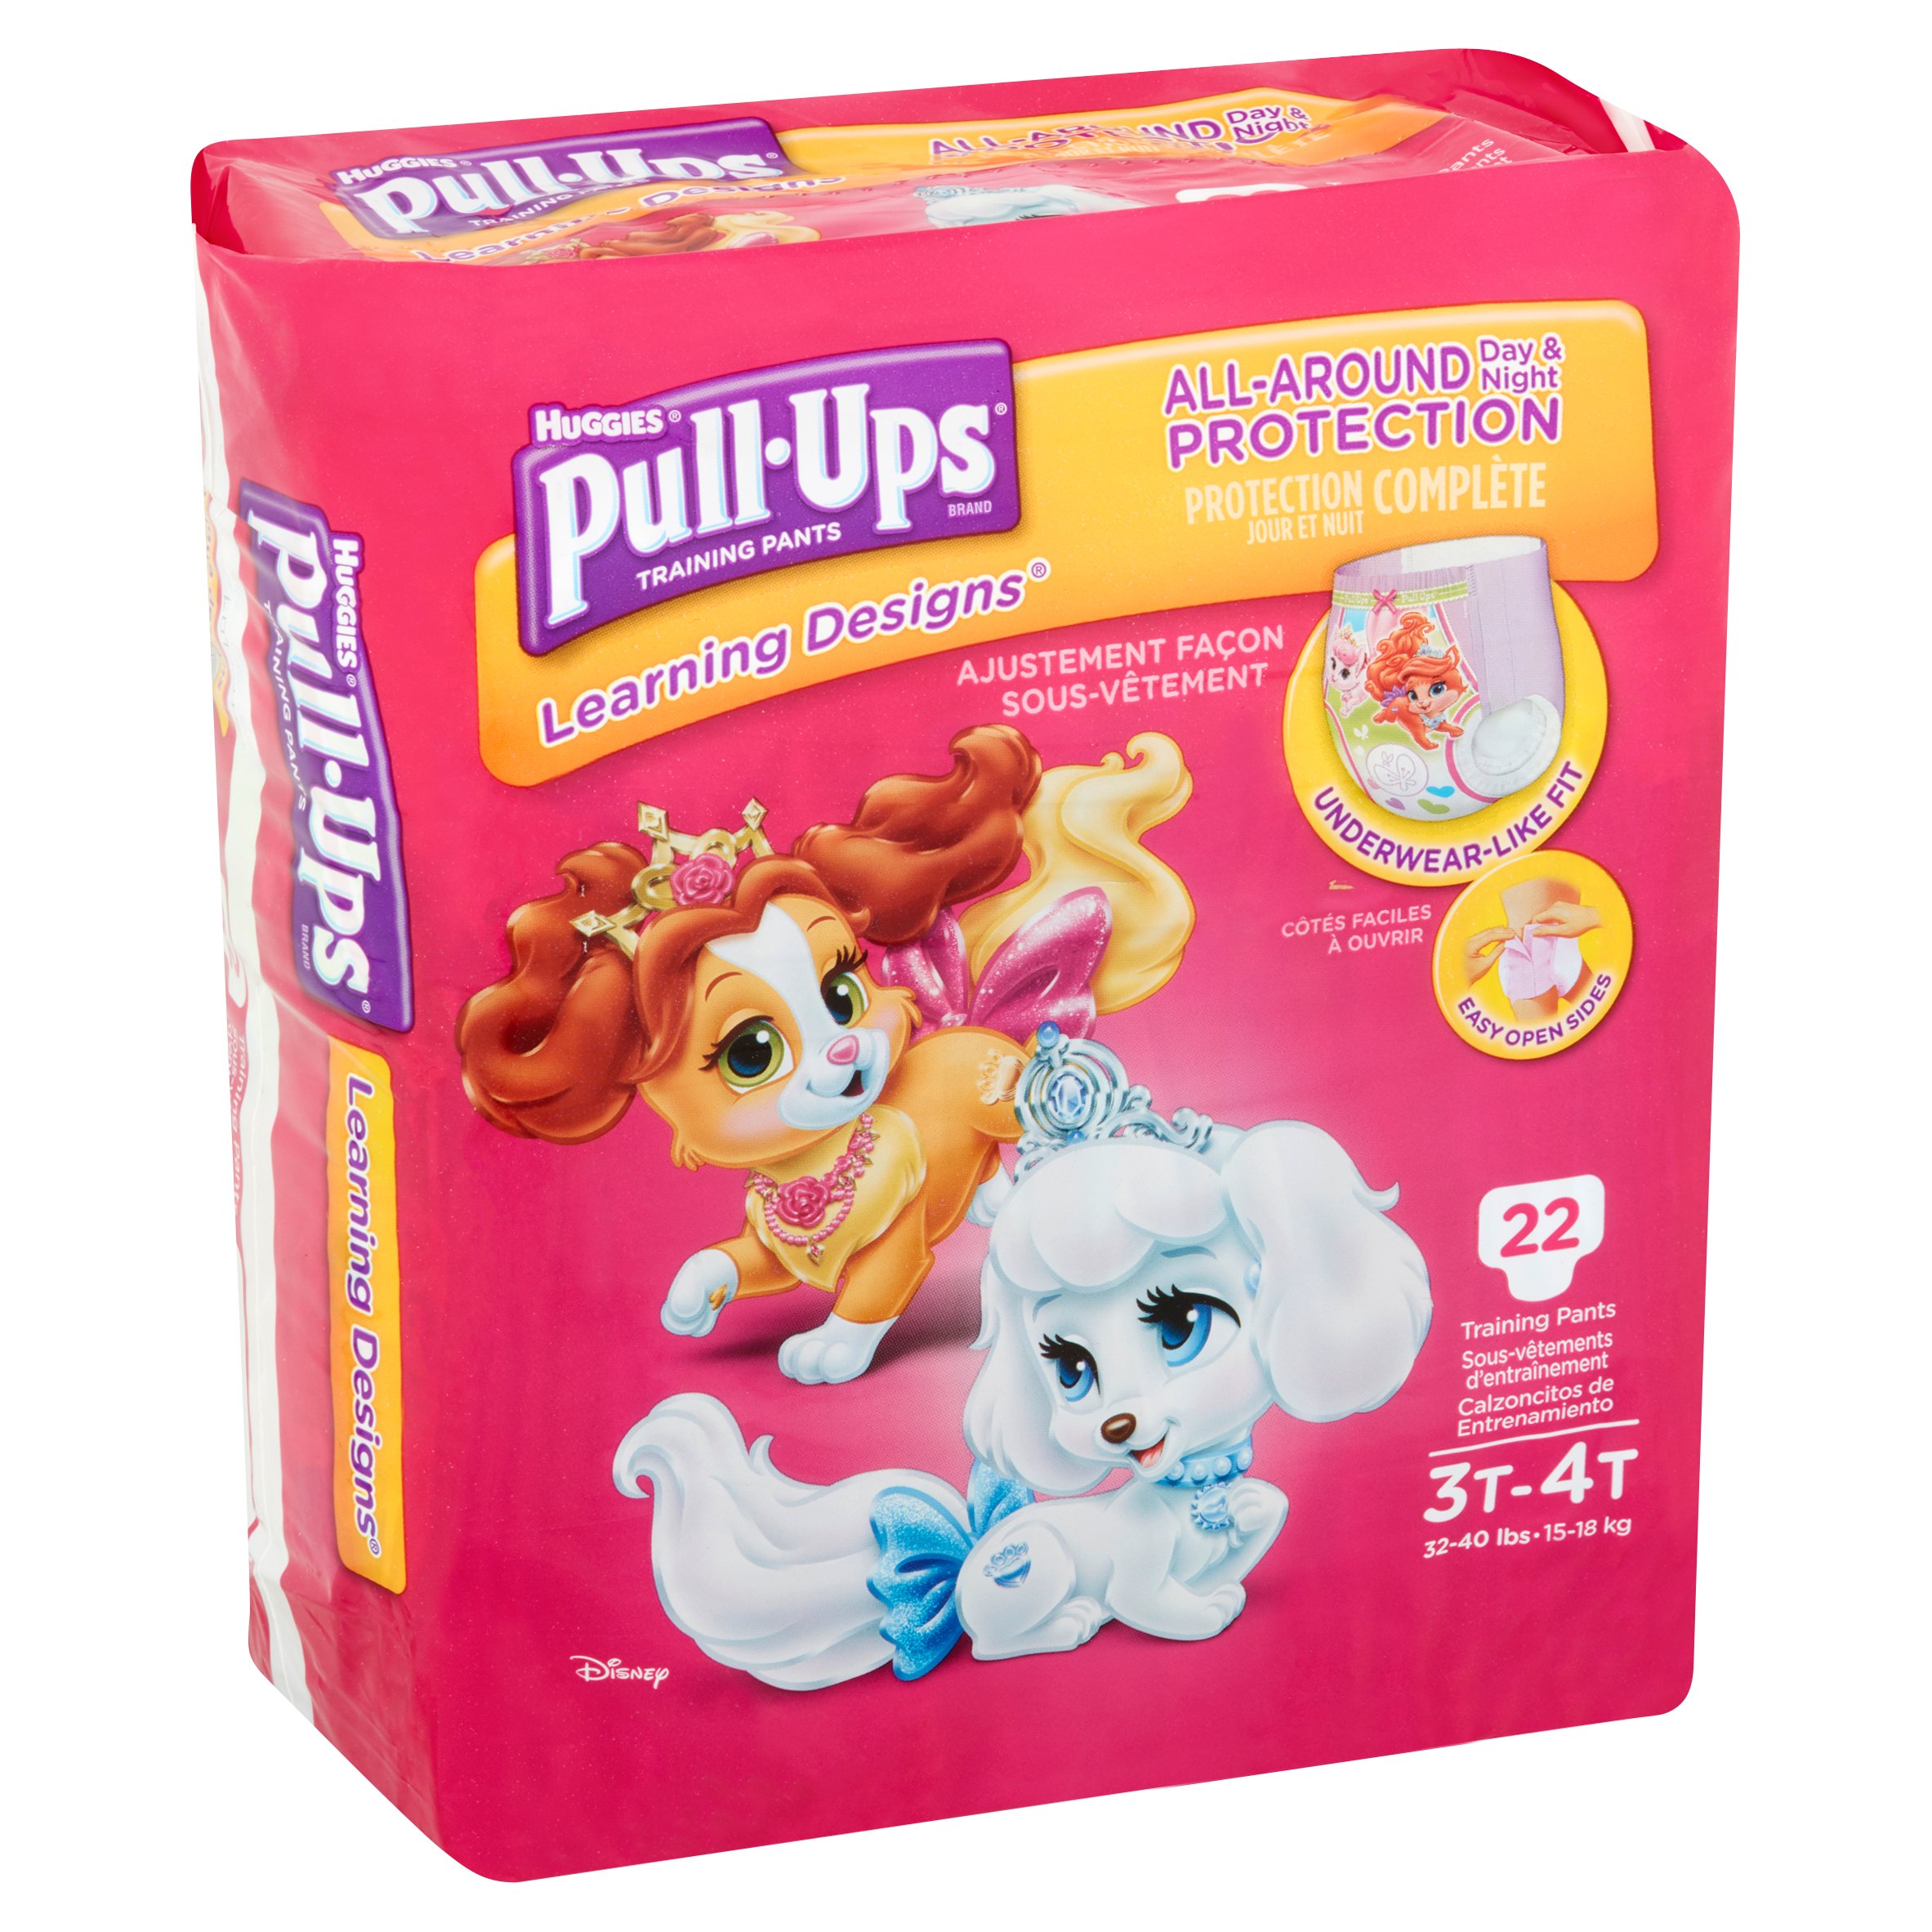 Huggies Pull-Ups All-Around Day & Night Protection Training Pants 3T-4T 32-40 lbs, 22 count - image 2 of 5